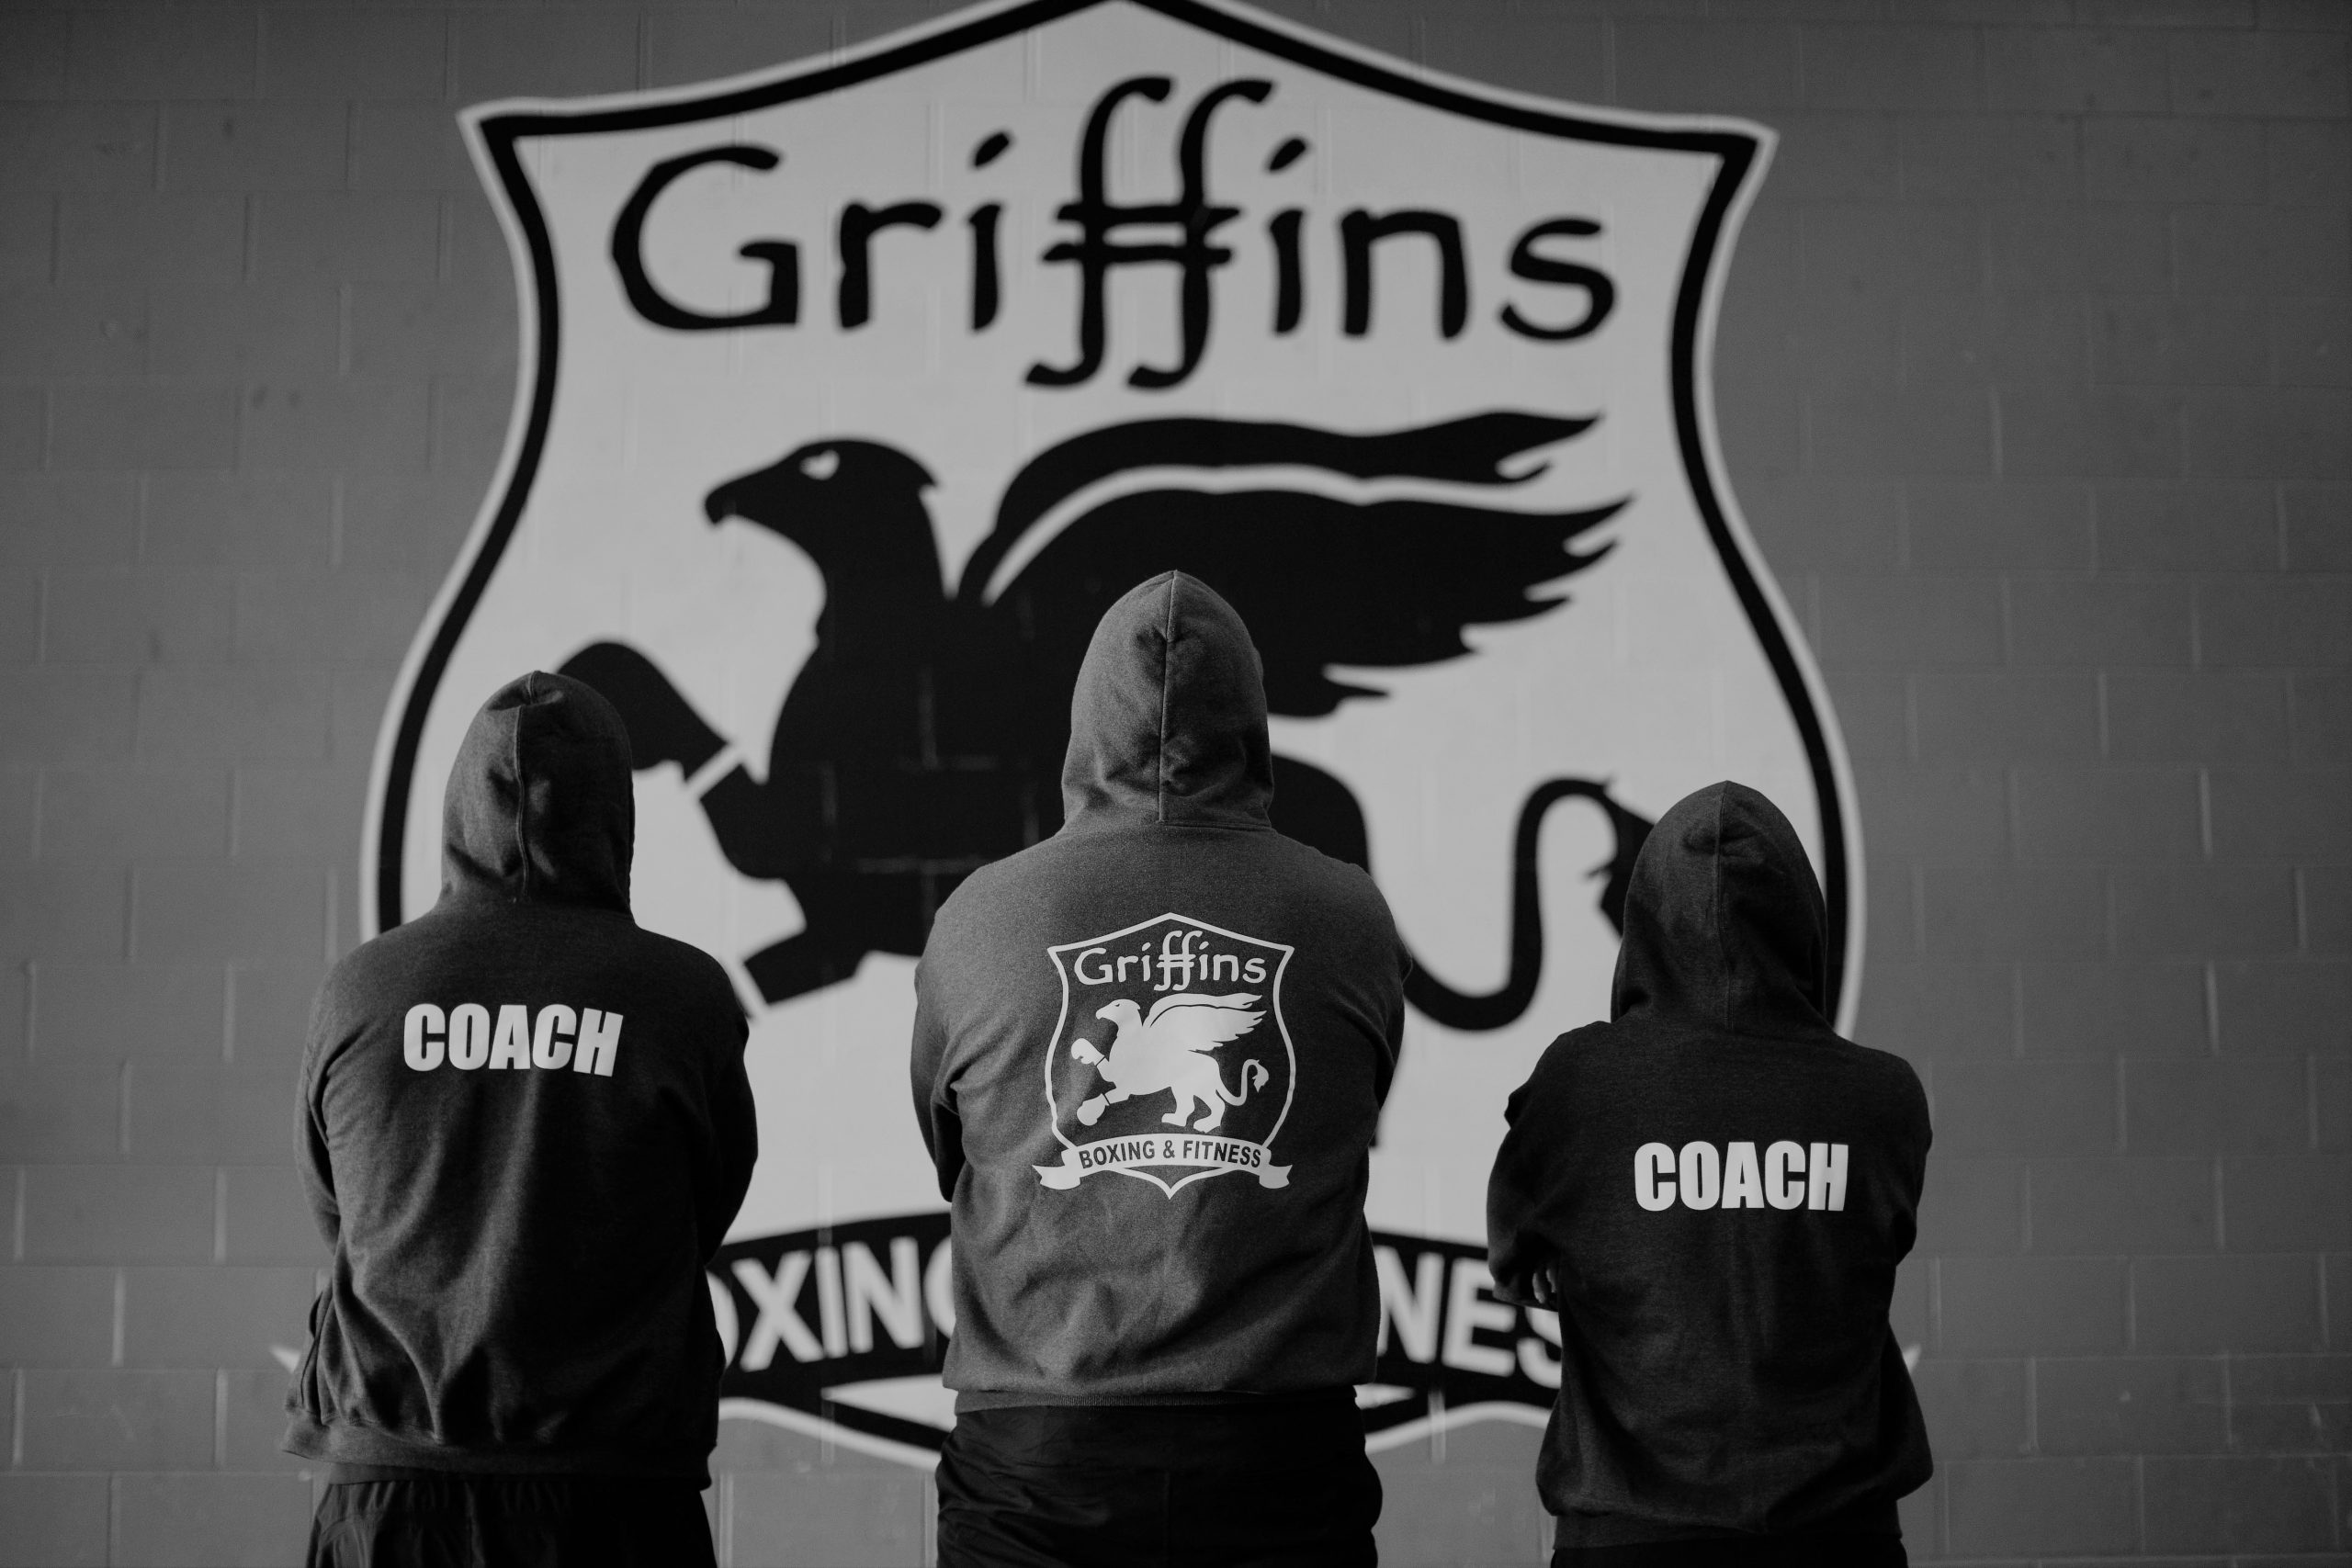 Griffins Boxing & Fitness